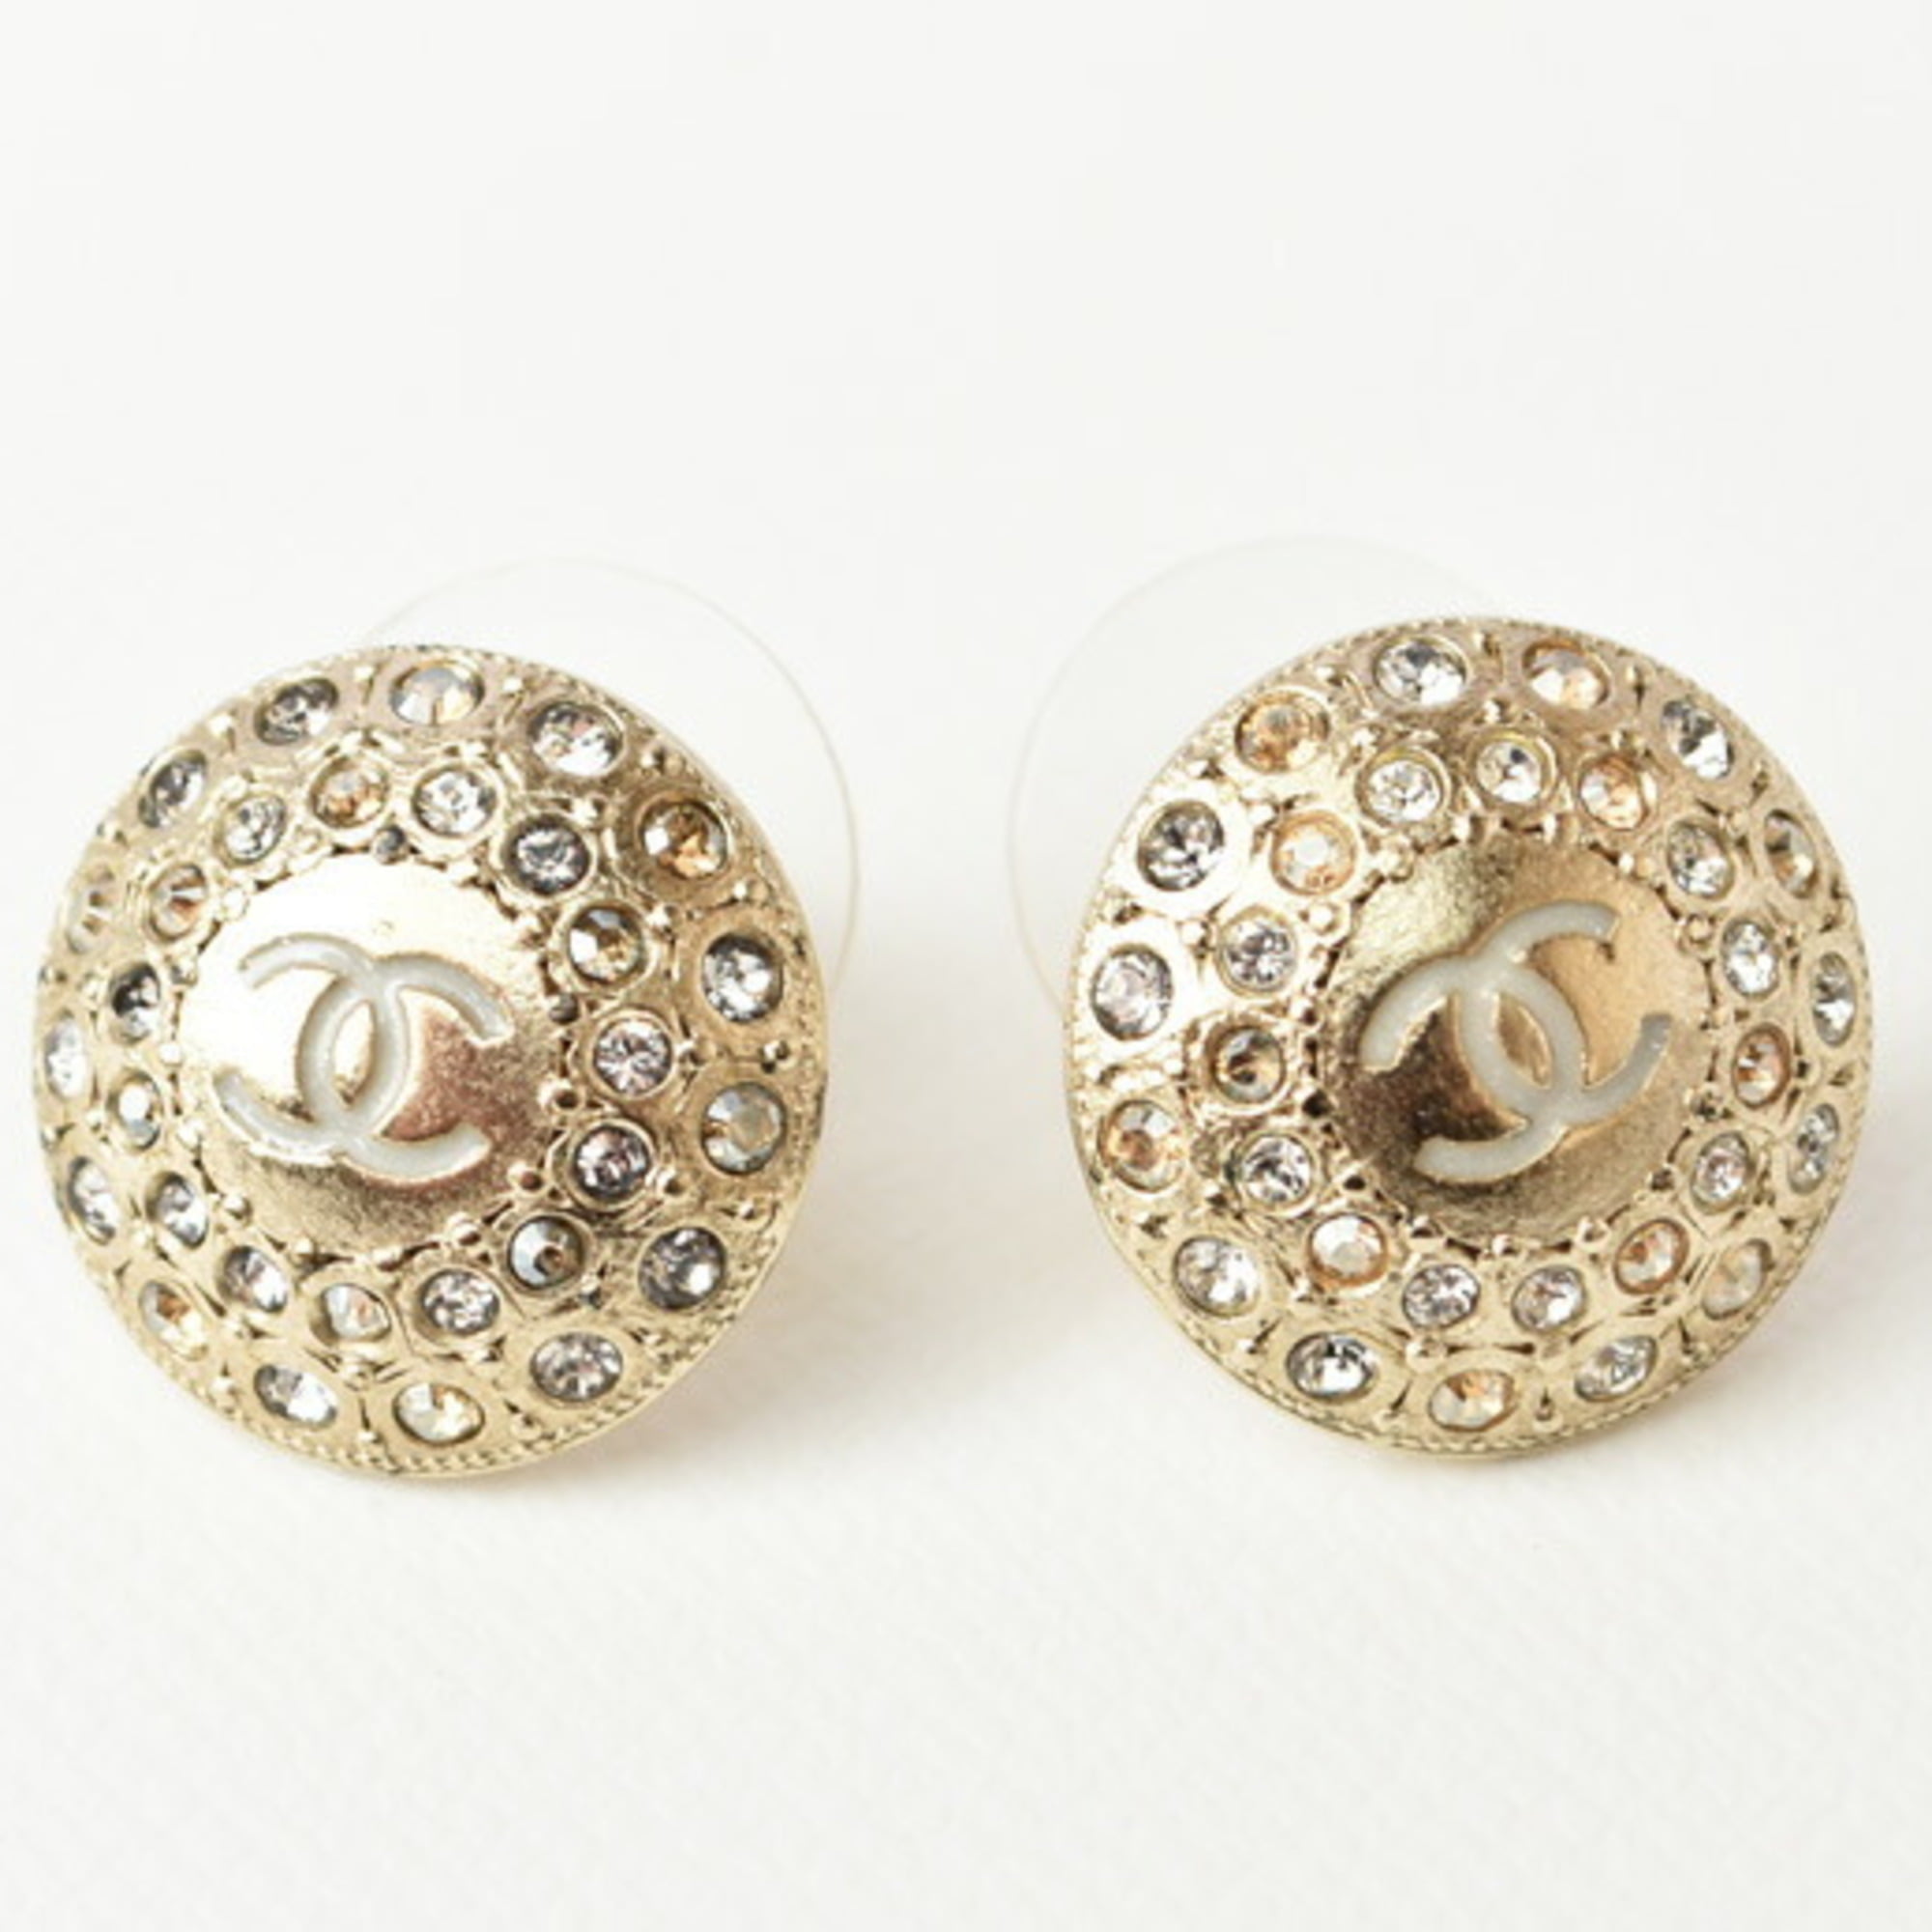 Authenticated Used Chanel earrings CHANEL circle motif rhinestone gold